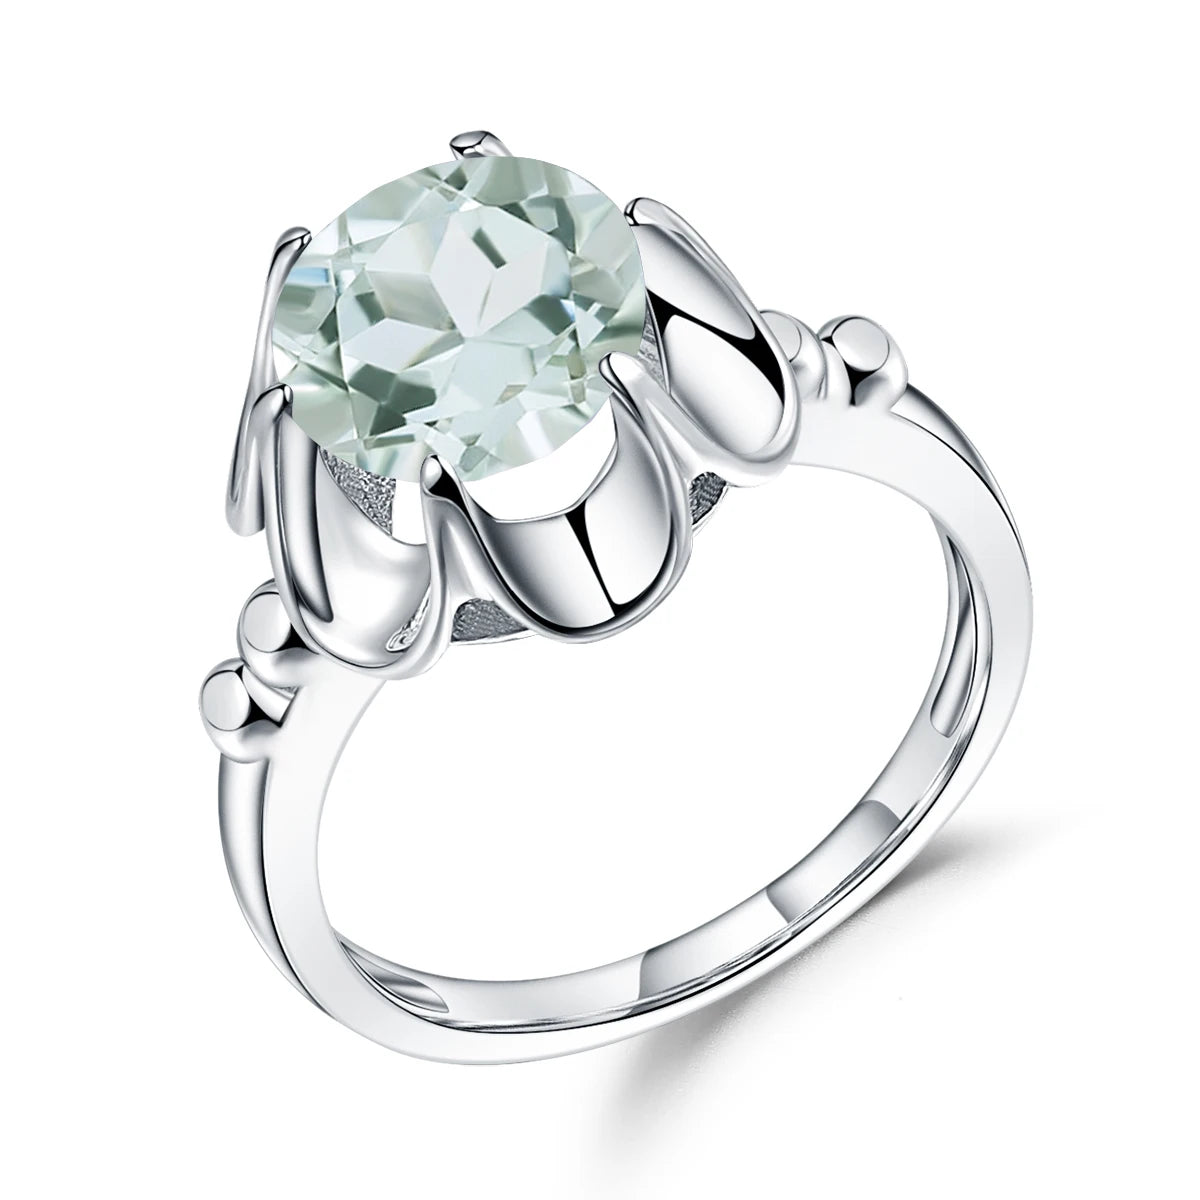 GEM'S BALLET 2.73Ct Natural Green Amethyst Engagement Ring For Women 925 Sterling Silver Gemstone Finger Rings Fine Jewelry Light Yellow Gold Color Green Amethyst